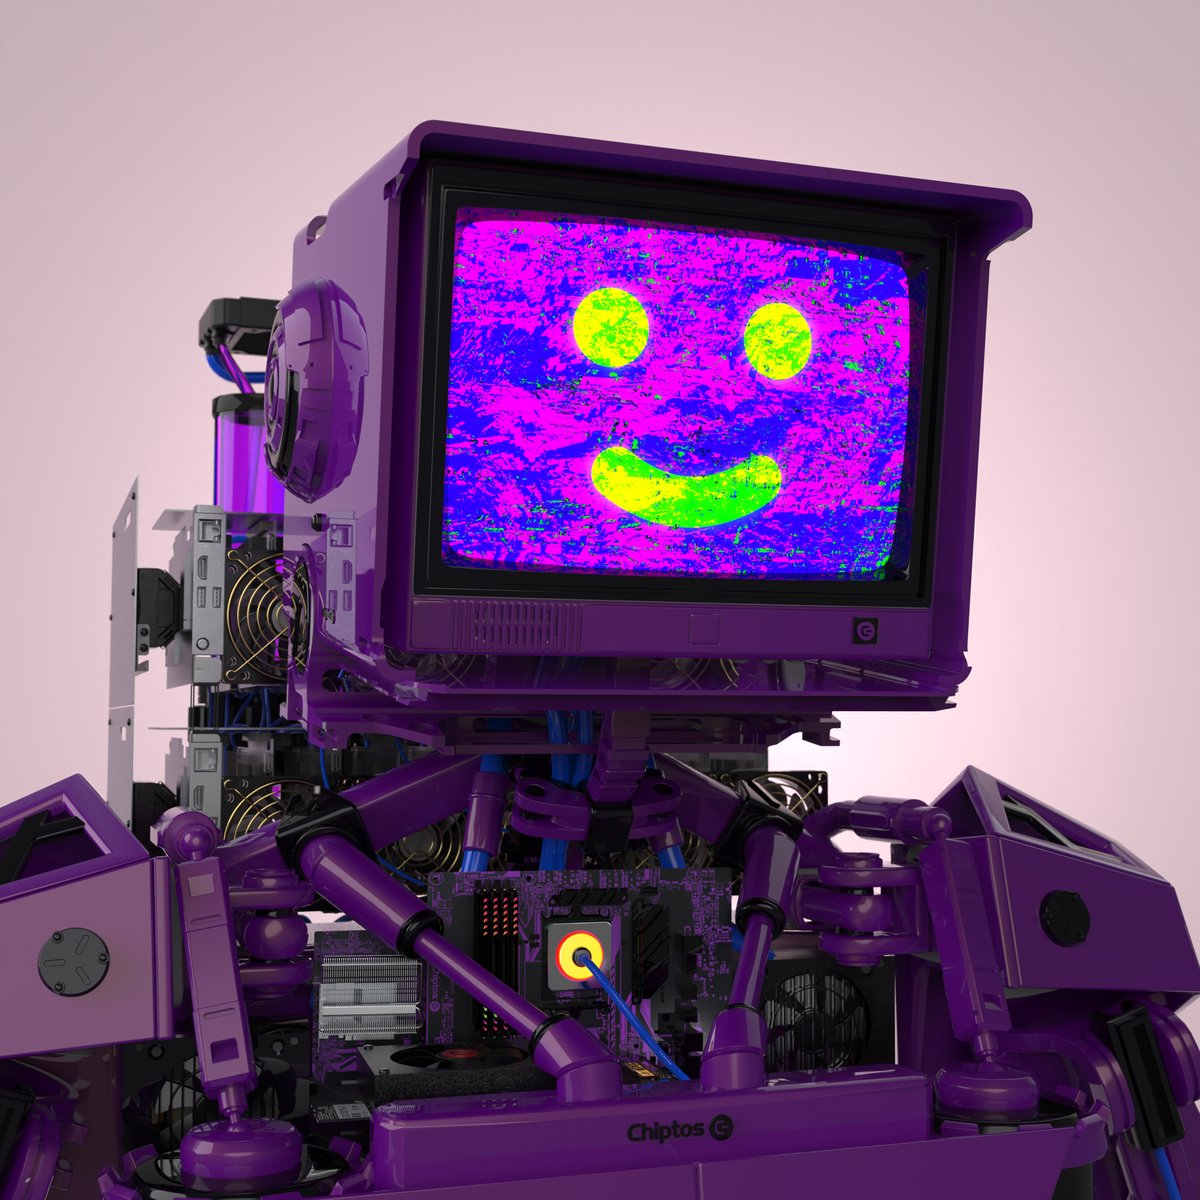 Chipto of the day.
Type: CRT with Purple Metallic and Cobalt cords.

ChiptosX #2146 opensea.io/assets/ETHEREU…

Chiptos are a collection of robots made out of computer parts.

#3DRobot #RobotDesign #chiptos